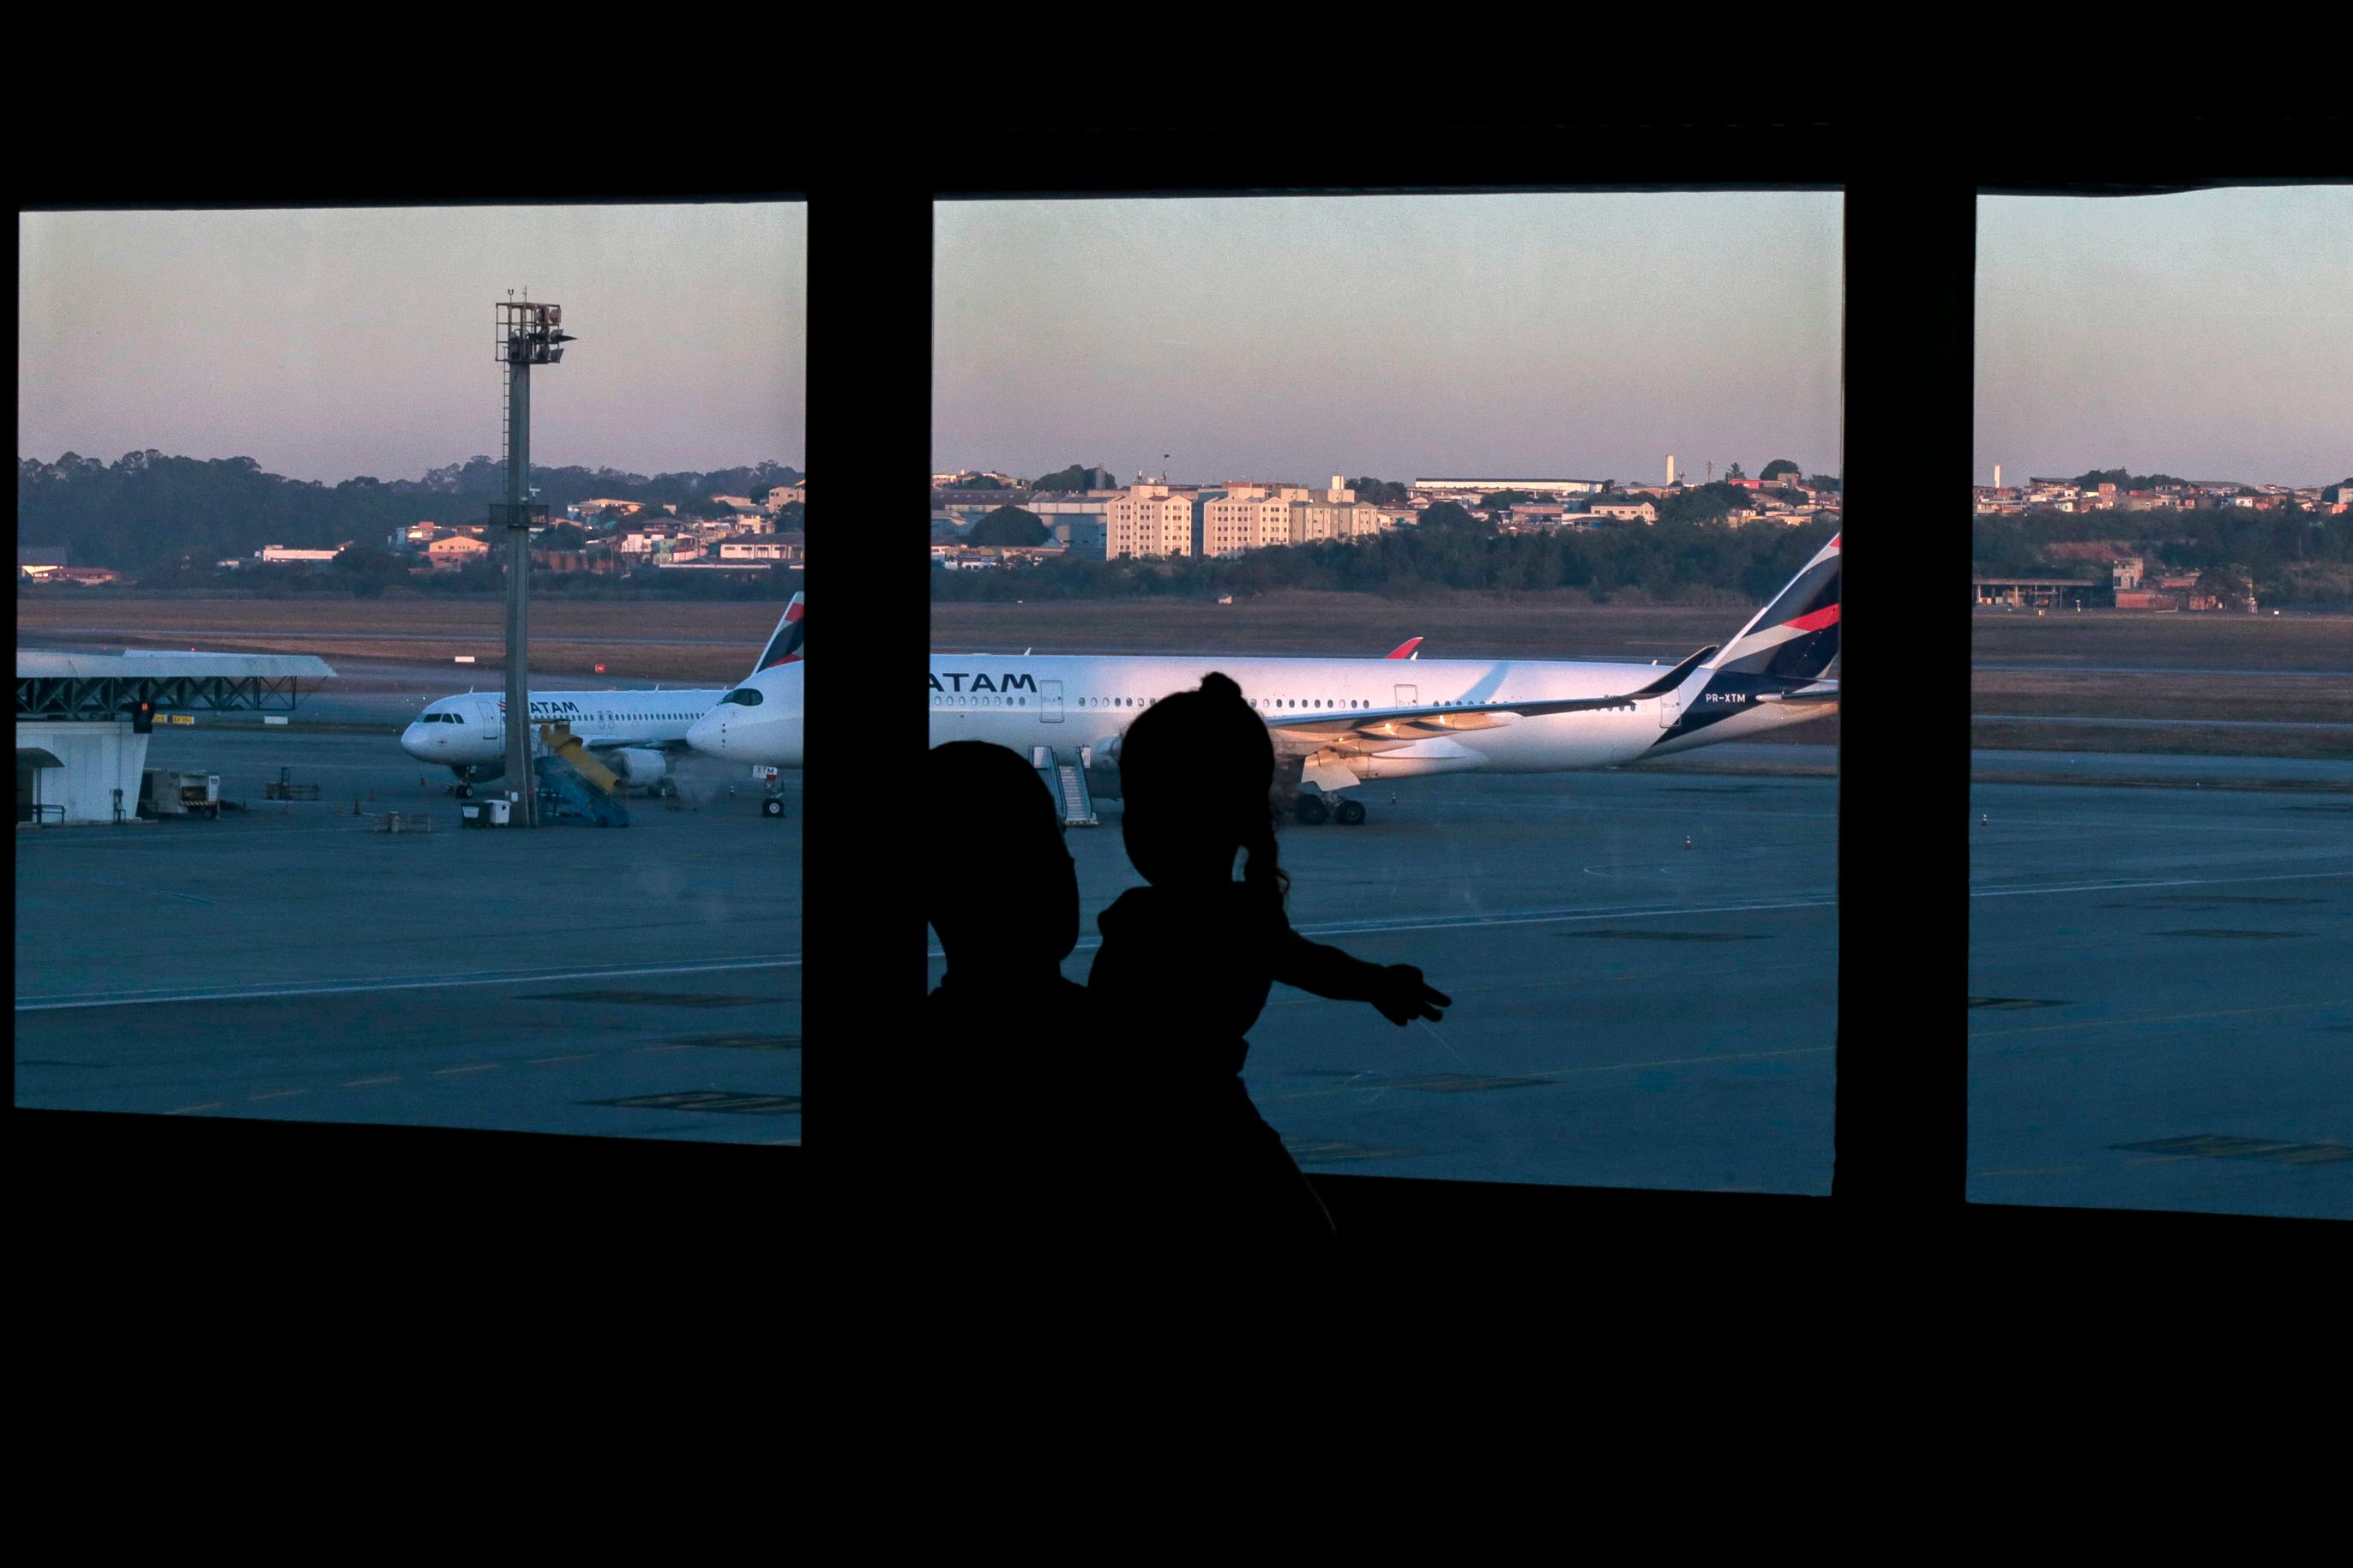 A Colombian citizen and a girl look at planes sitting at the tarmac of Guarulhos International Airport, in Guarulhos, near Sao Paulo, Brazil, on May 26, 2020.